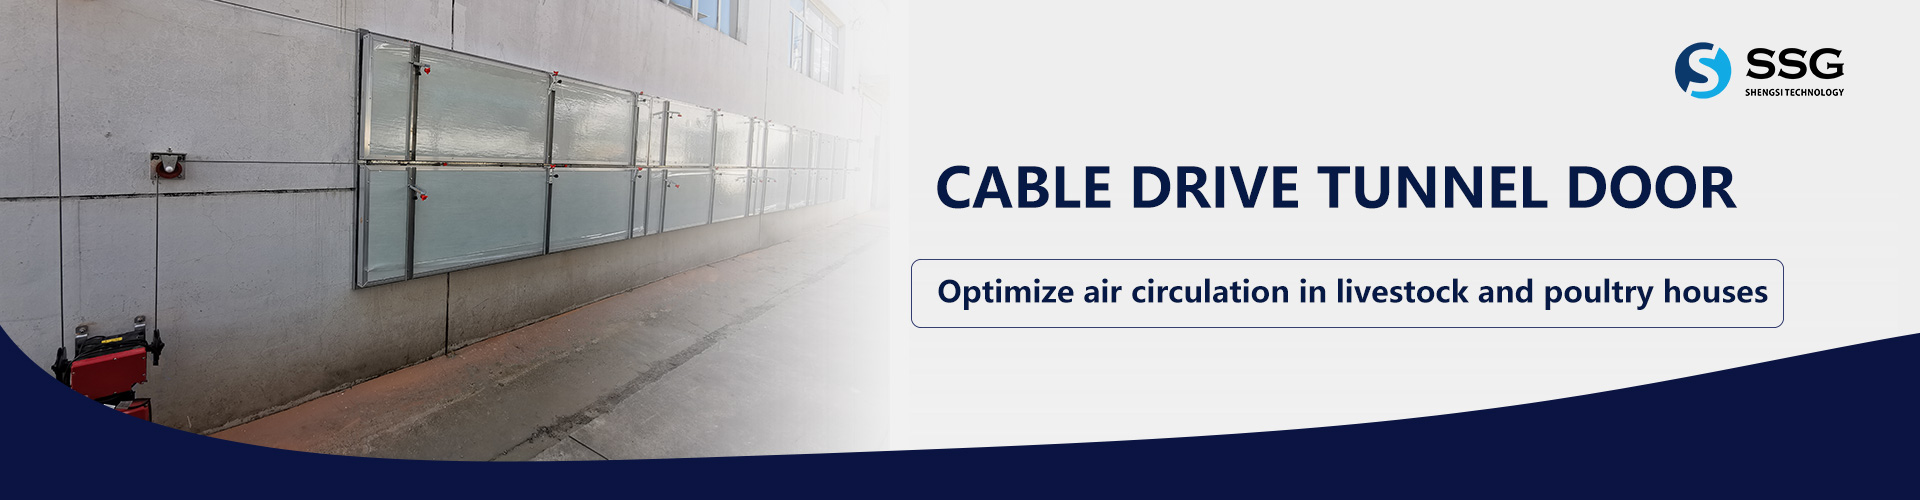 CABLE-DRIVE-TUNNEL-DOOR-banner